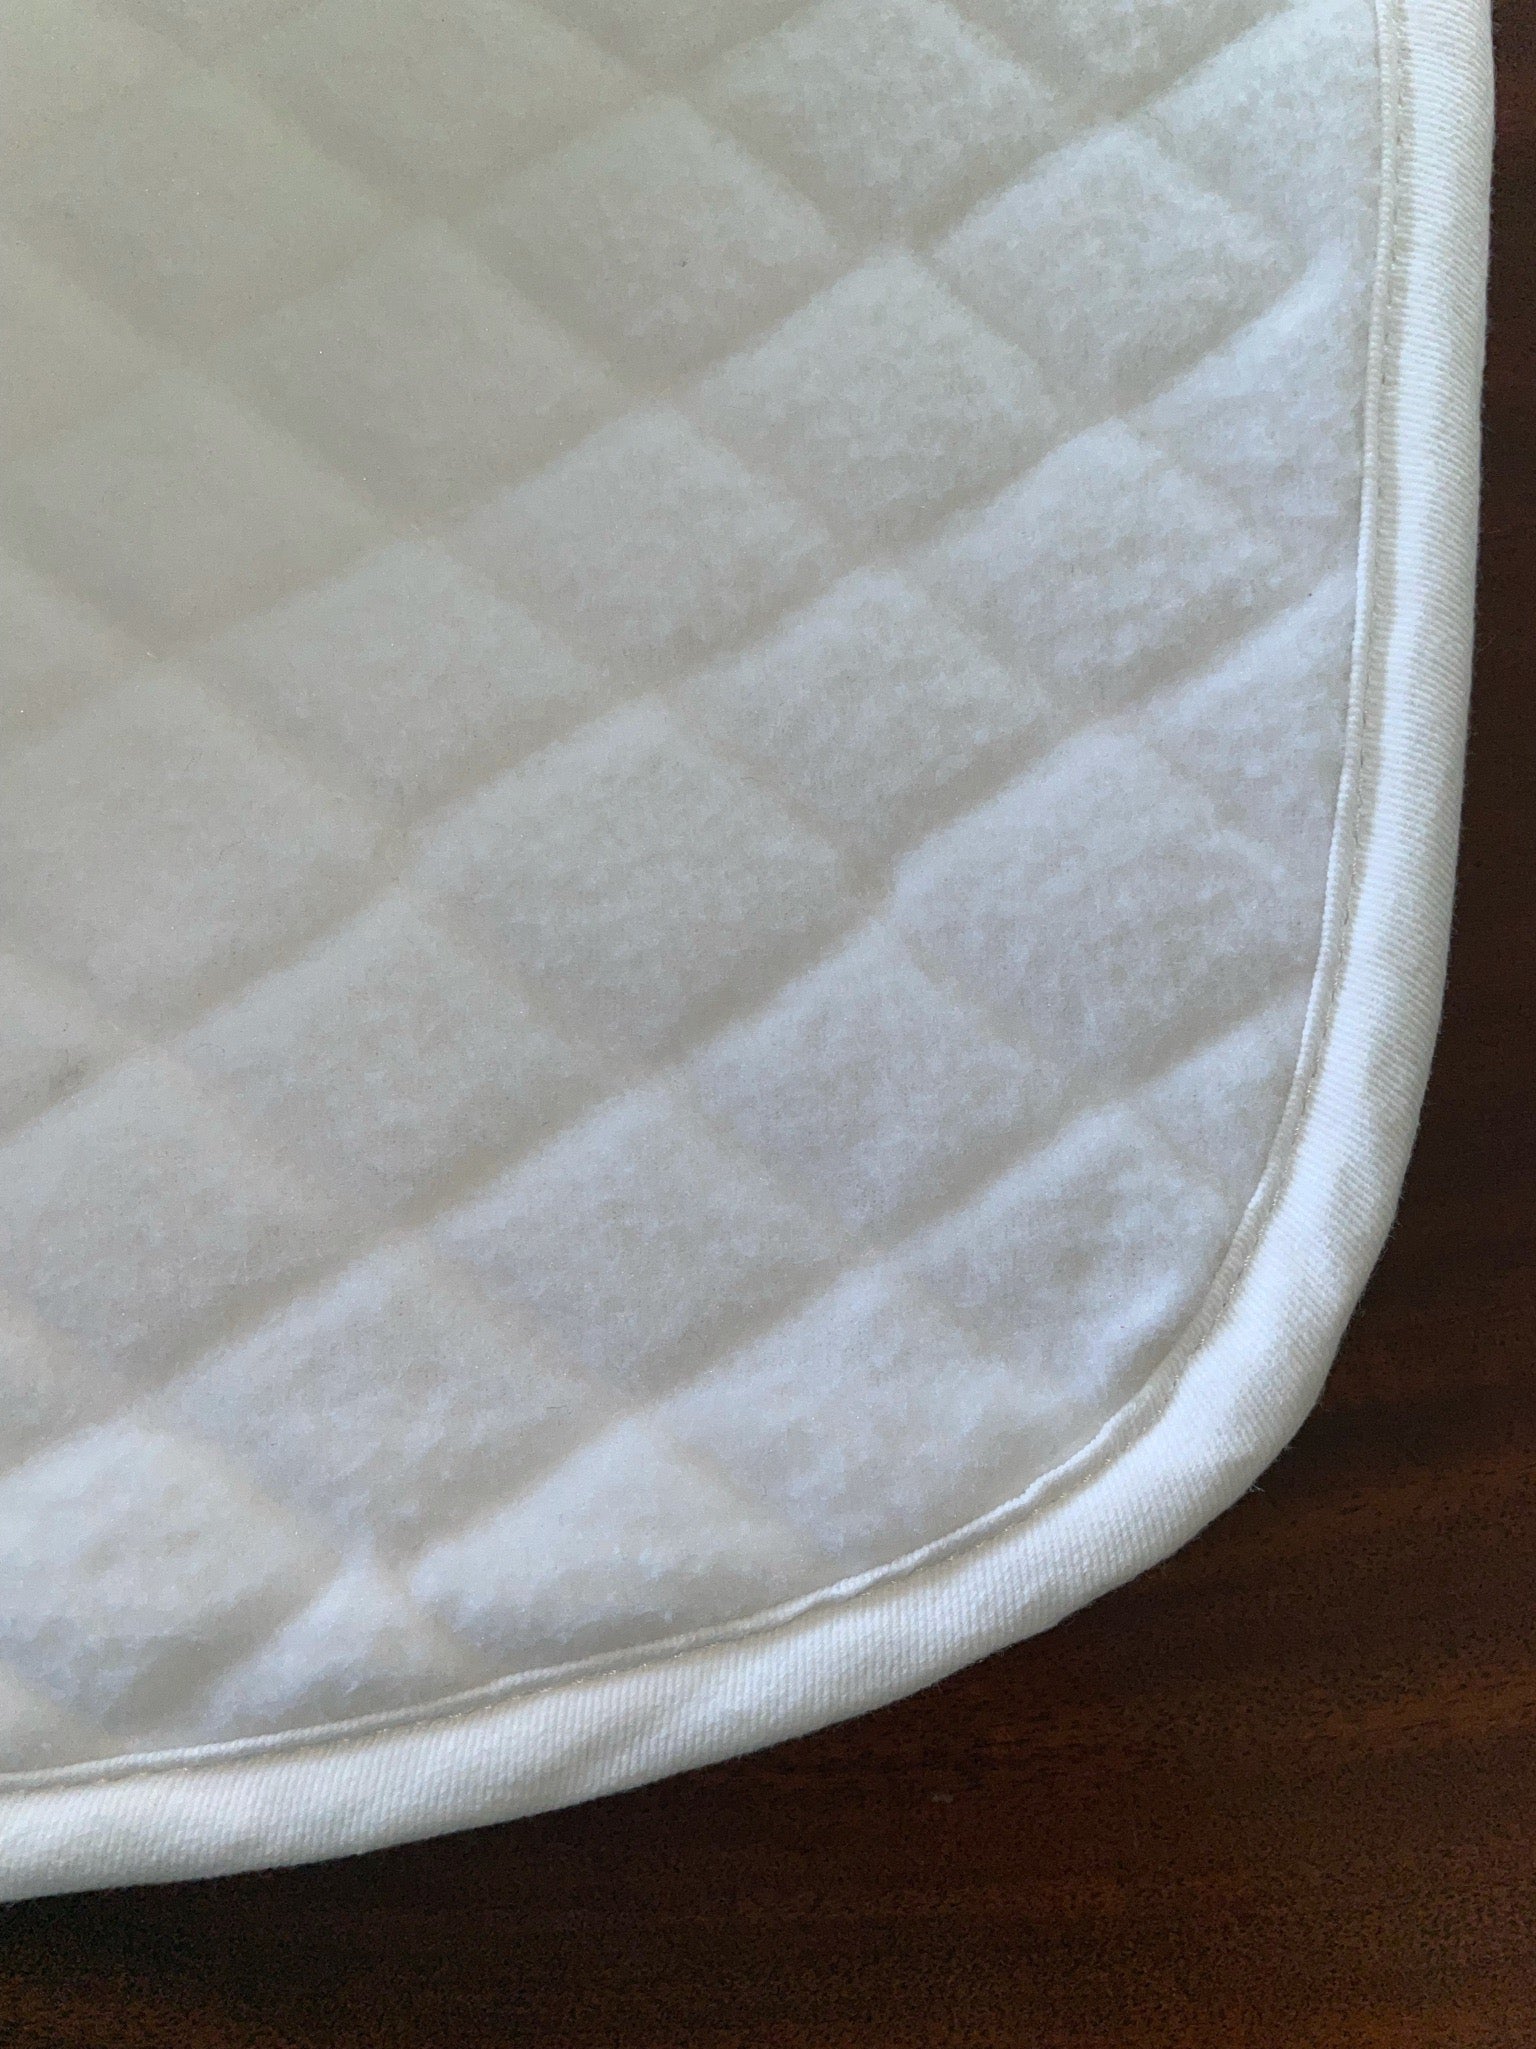 Embroidered Square Saddle Pad